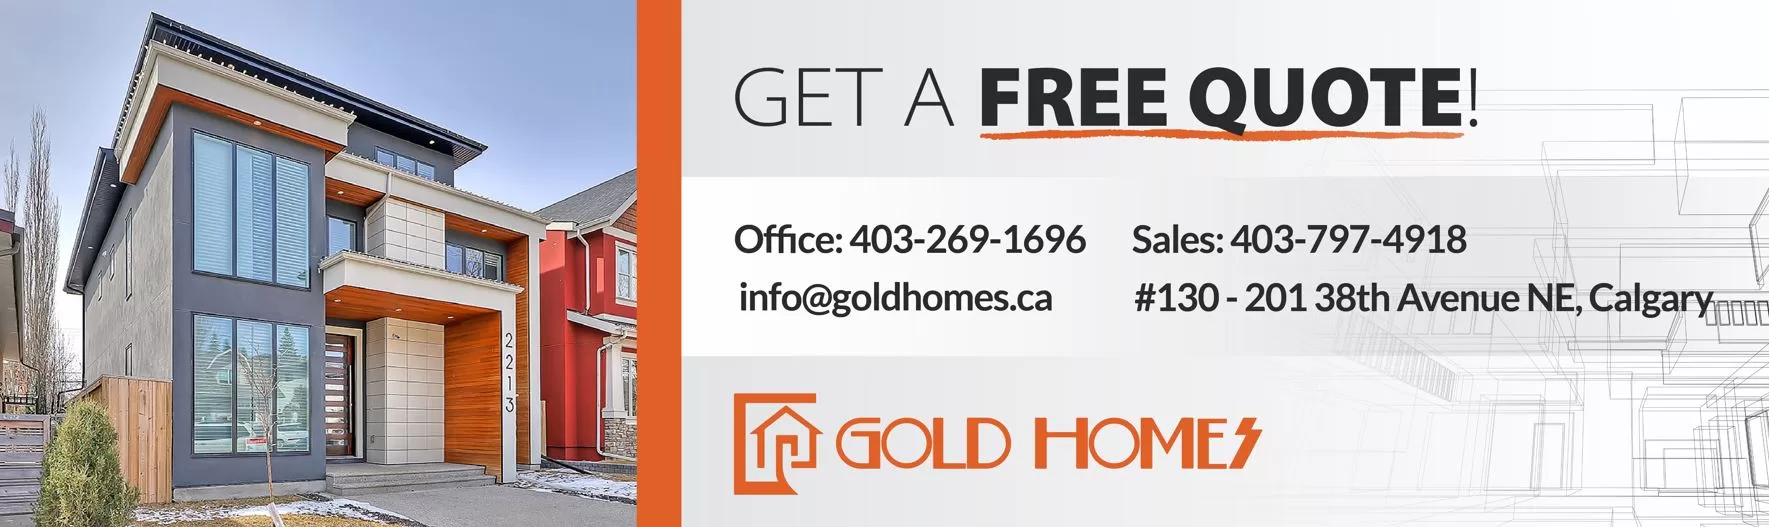 Get a free quote for your infill home build in Calgary, Alberta - Banner CTA 1